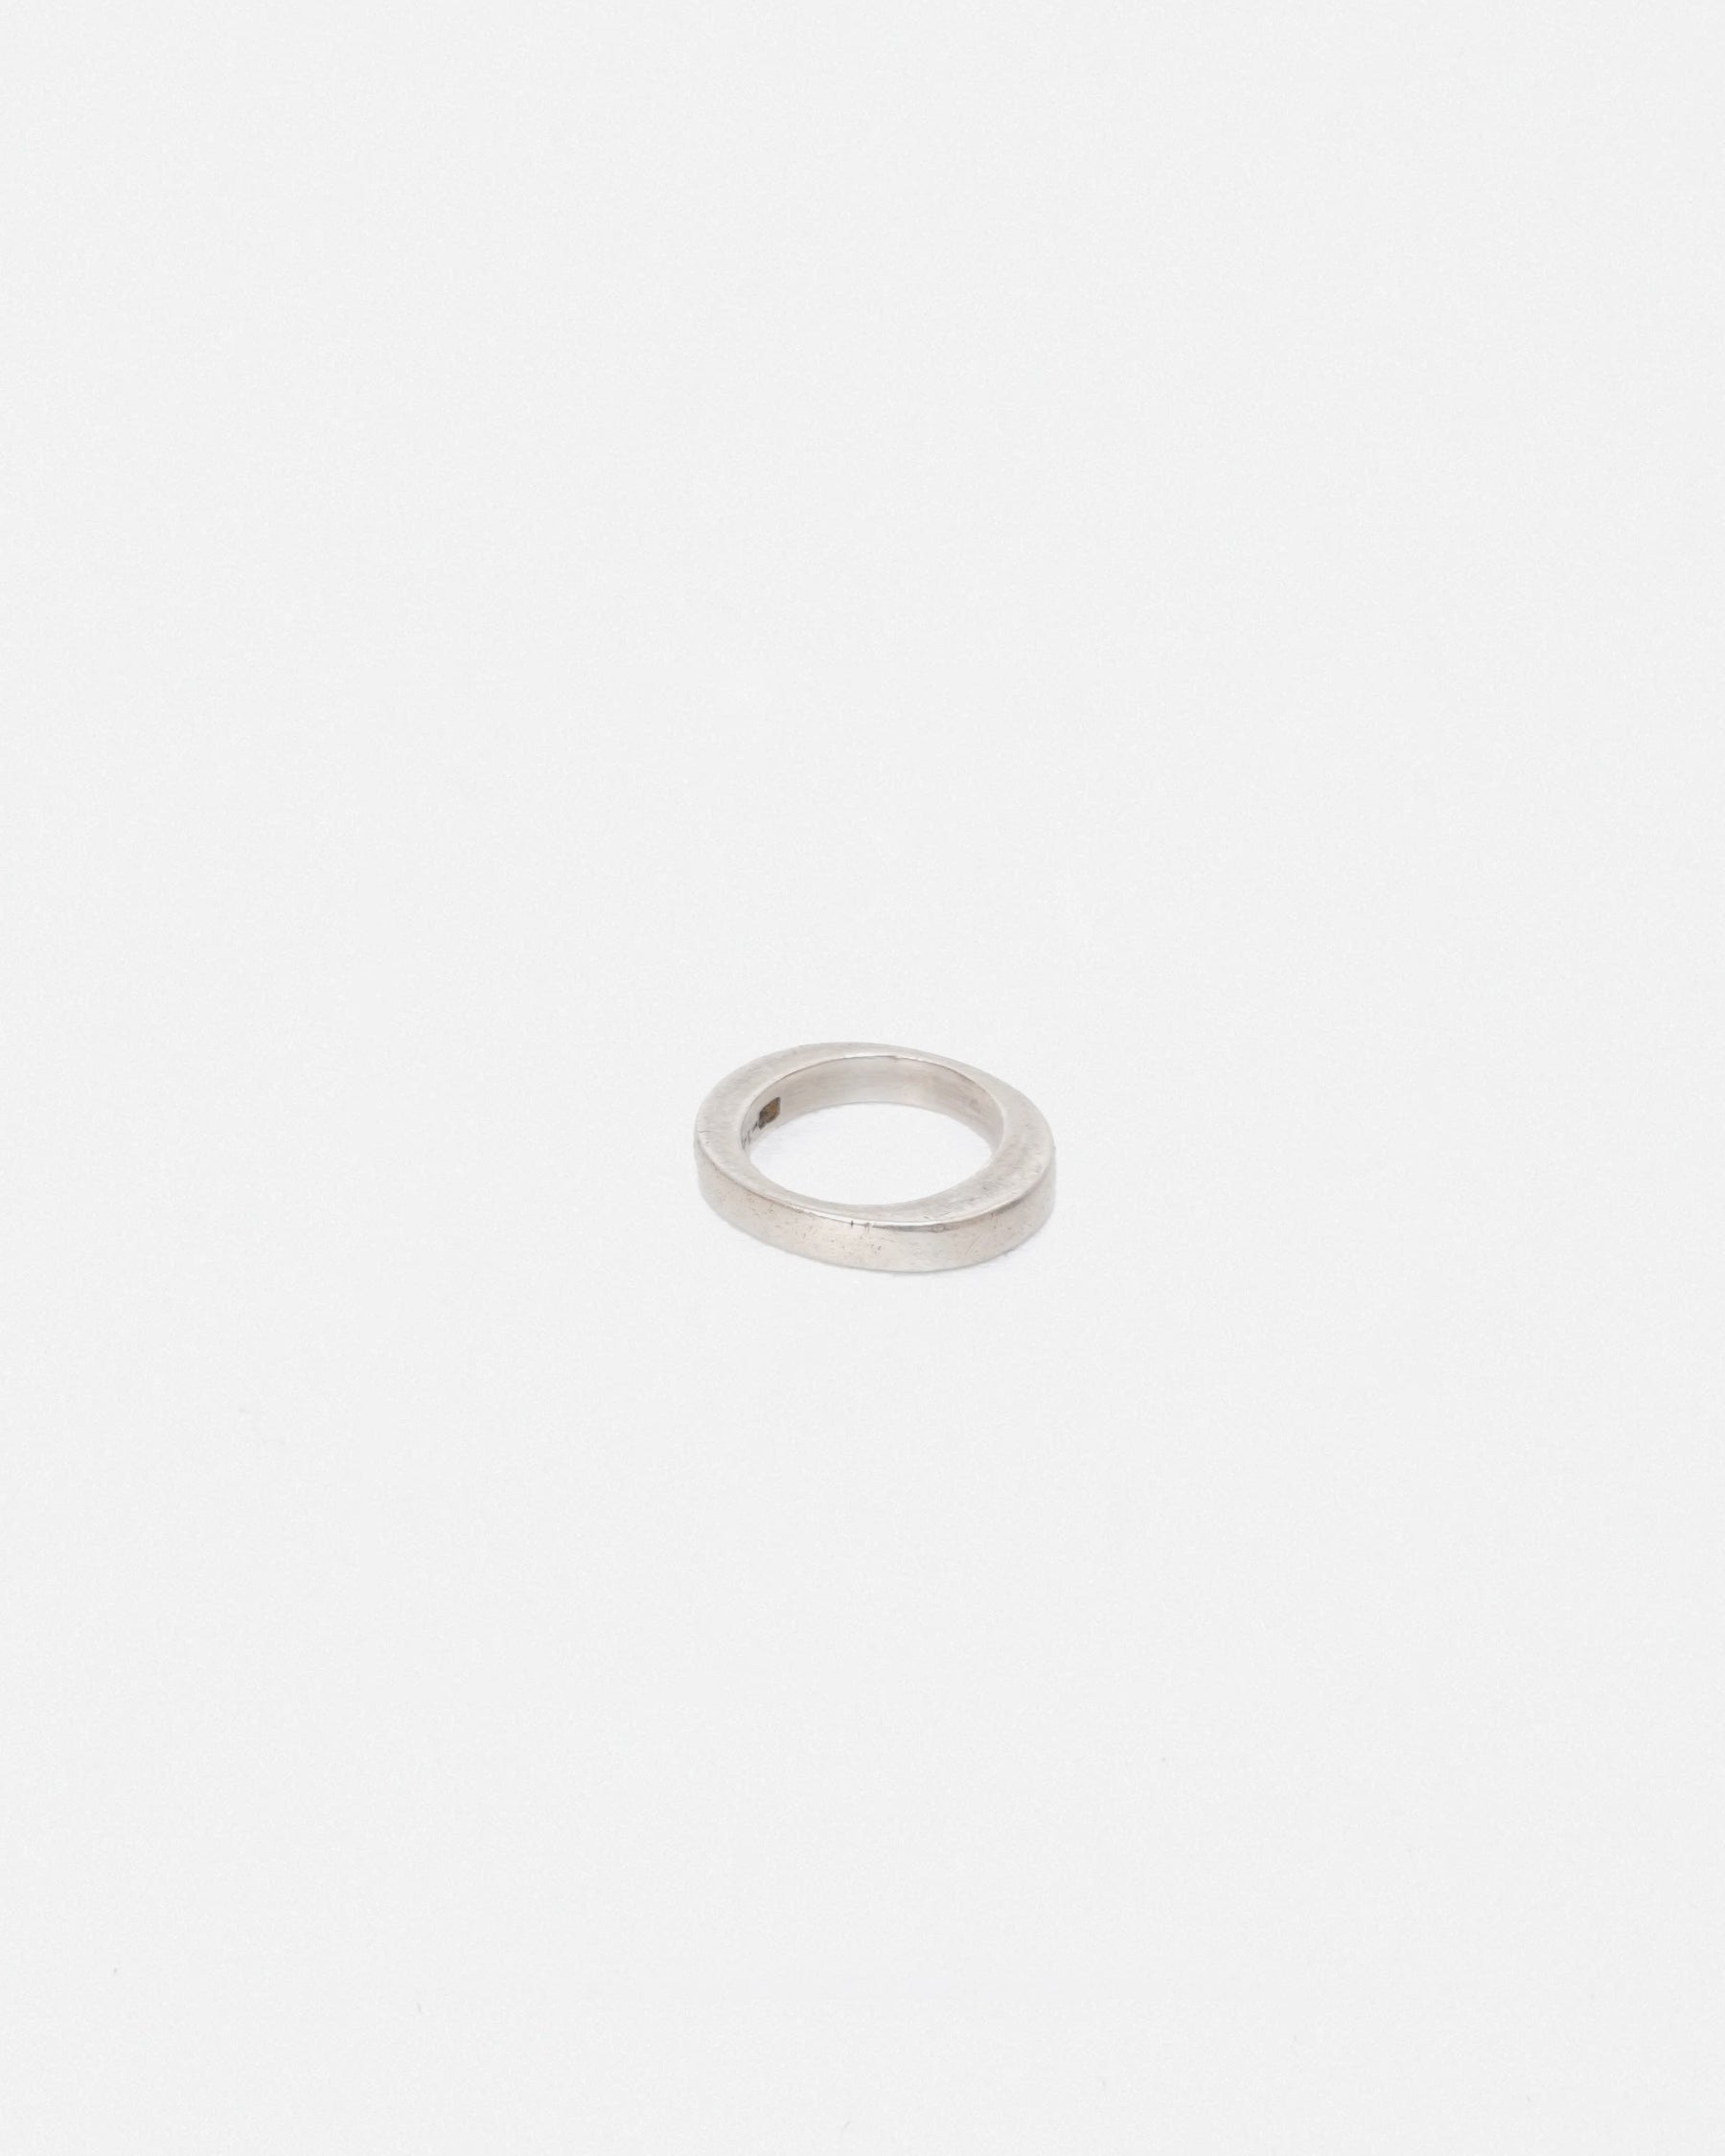 Silver Ring: size 13